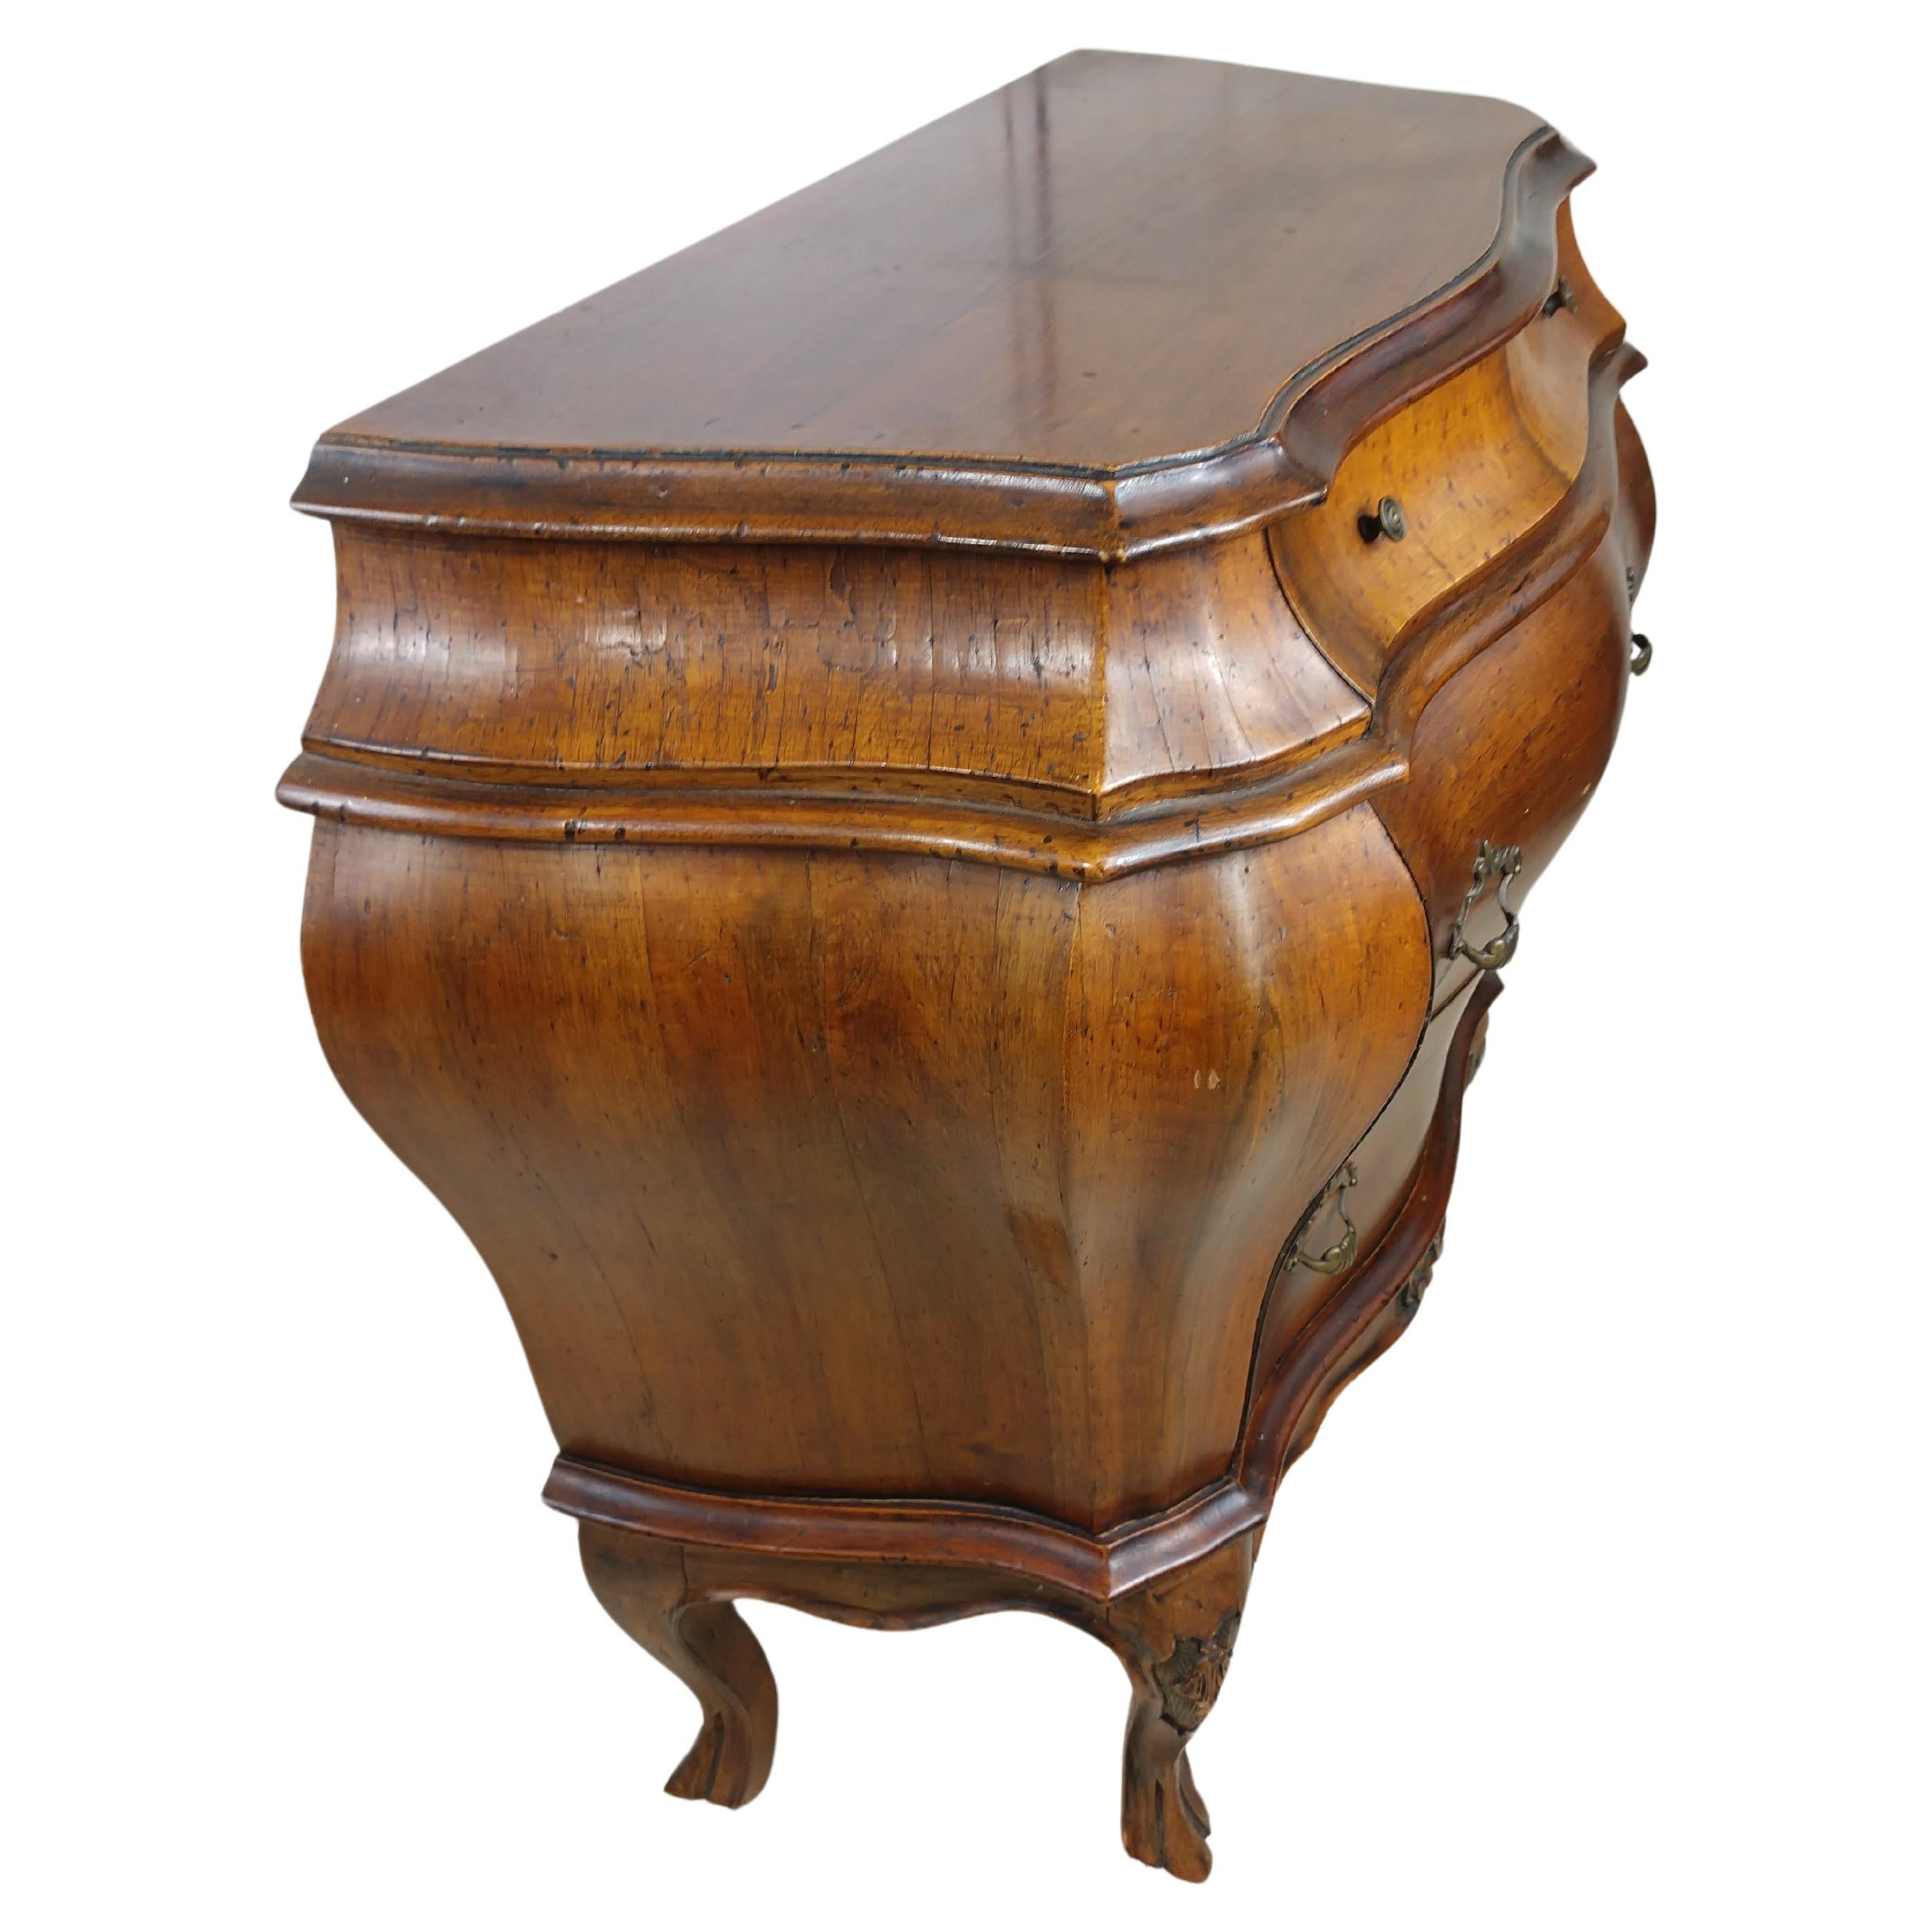 Elegant 3 drawer Rococo style bombe chests perfect for bedside or a living room. Created from walnut and in excellent vintage condition with minimal wear. Beautiful curves with original hardware and finish.